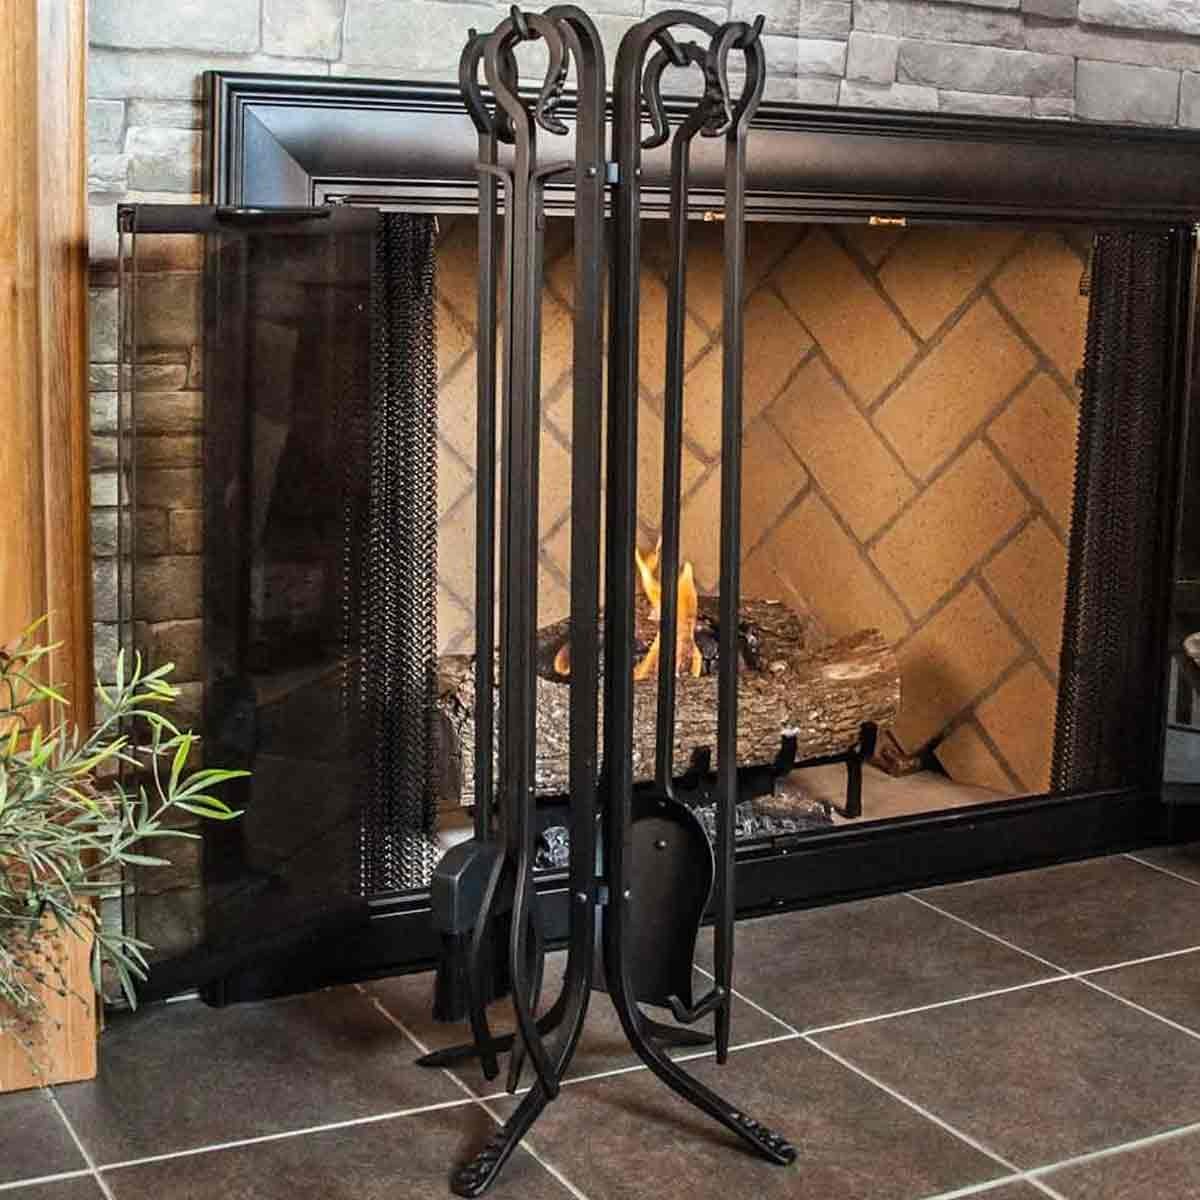 Brushed Nickel Fireplace Doors Awesome Wood Stove tools tool Sets Fireplace tool Set